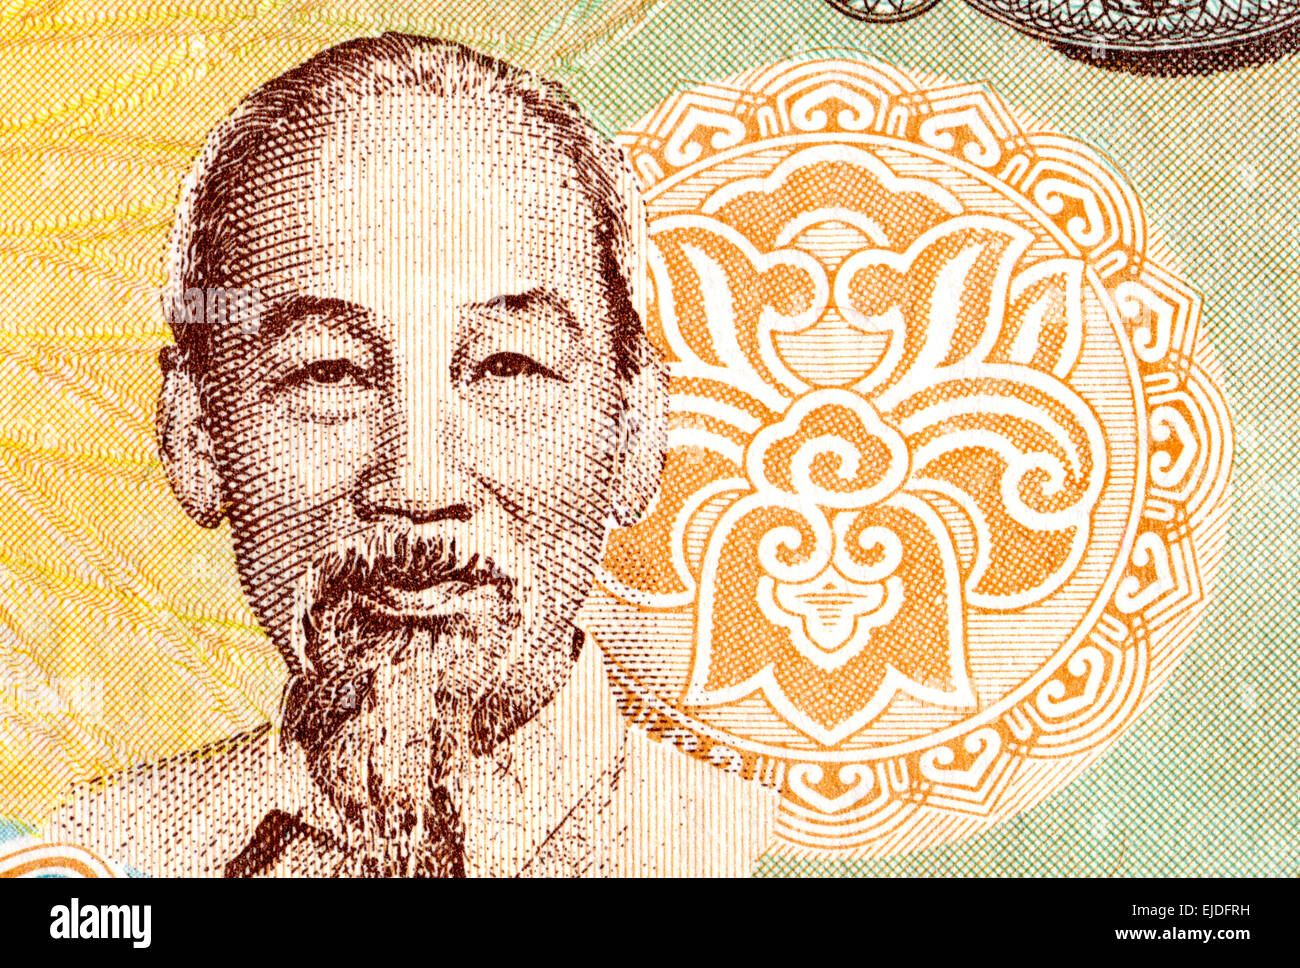 Detail from a Vietnamese banknote showing portrait of Ho Chi Minh Stock Photo